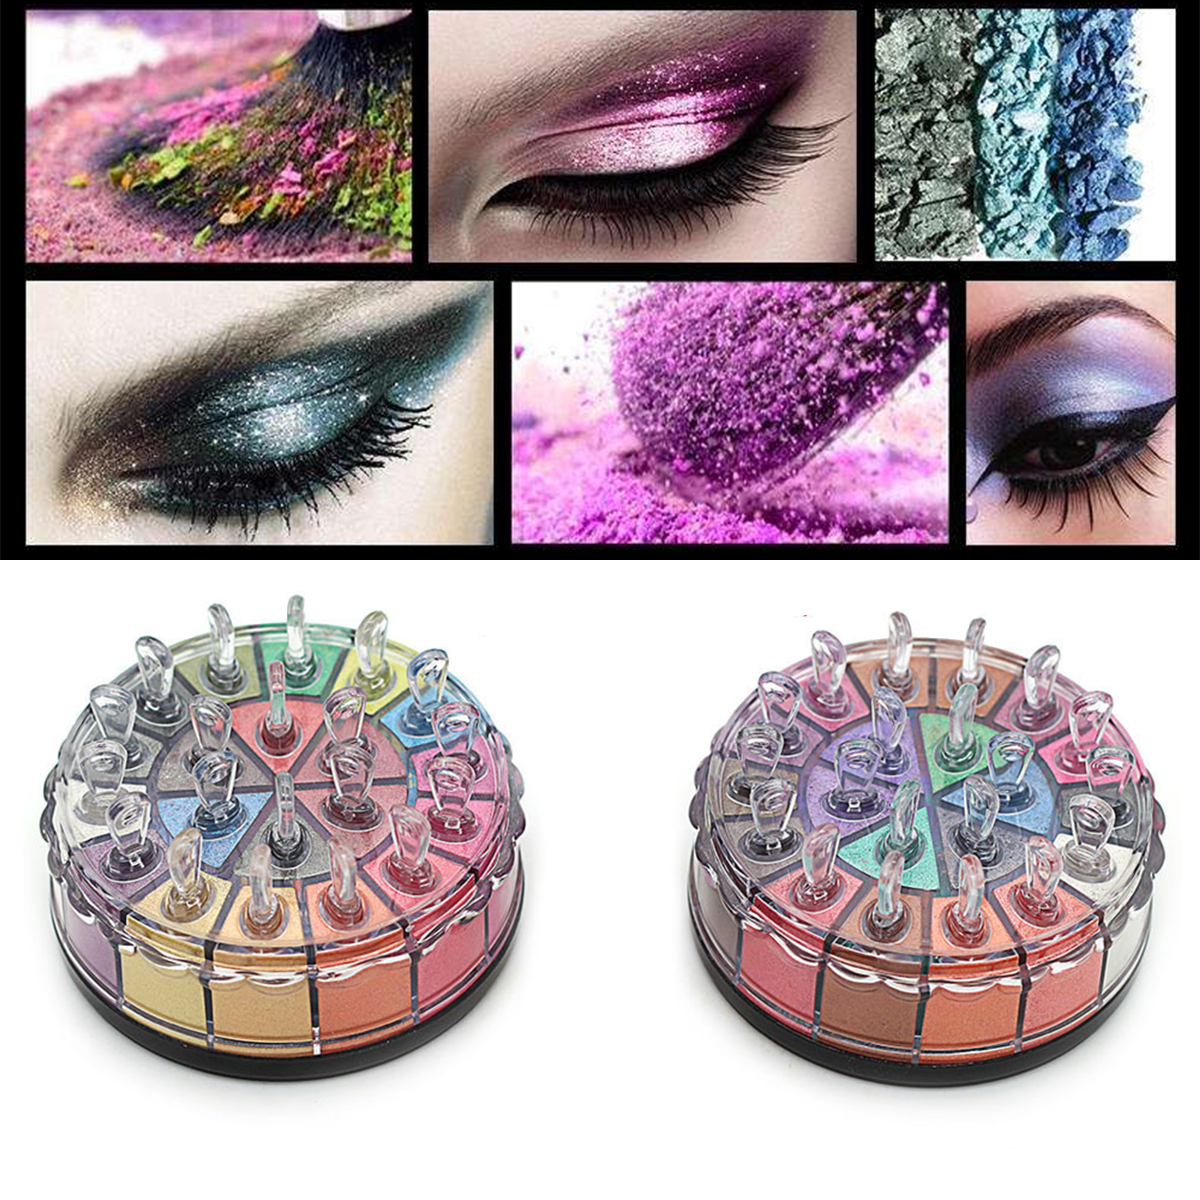 20-Colors-Shimmer-Eyeshadow-Palette-Glitter-Smoky-Earth-Color-Eye-Shadow-Power-Long-Lasting-1133568